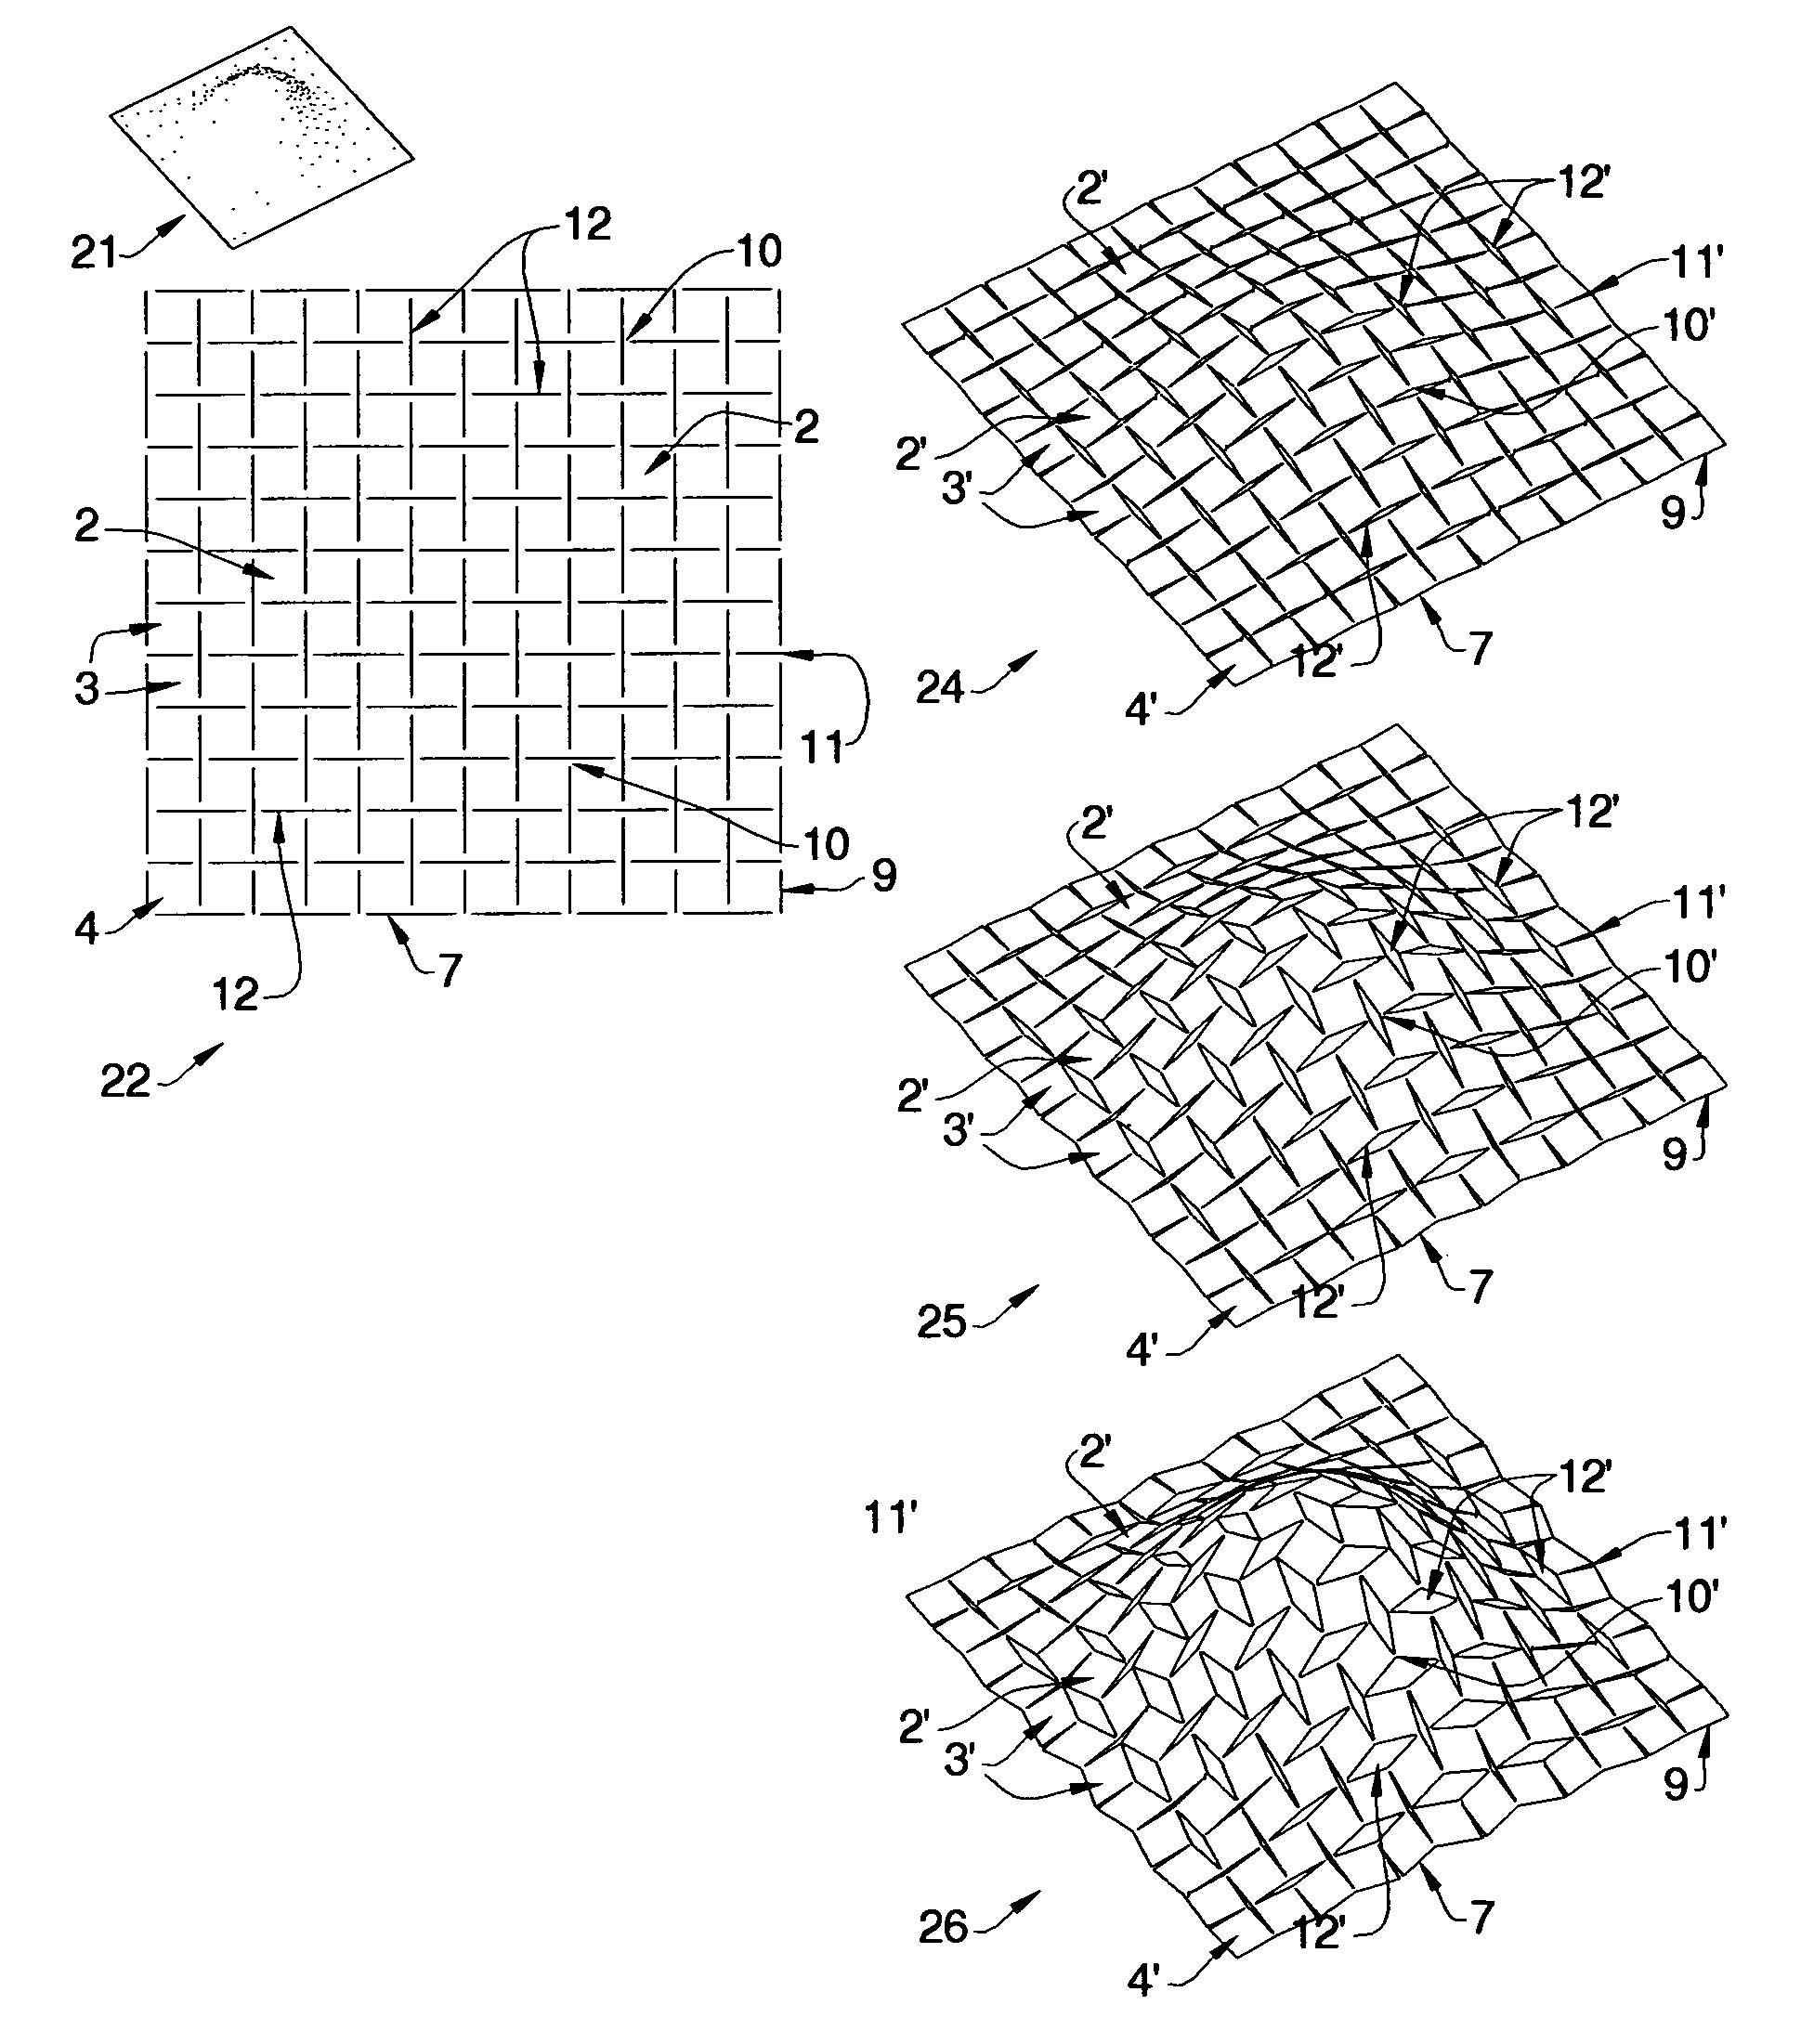 Multi-directional and variably expanded sheet material surfaces